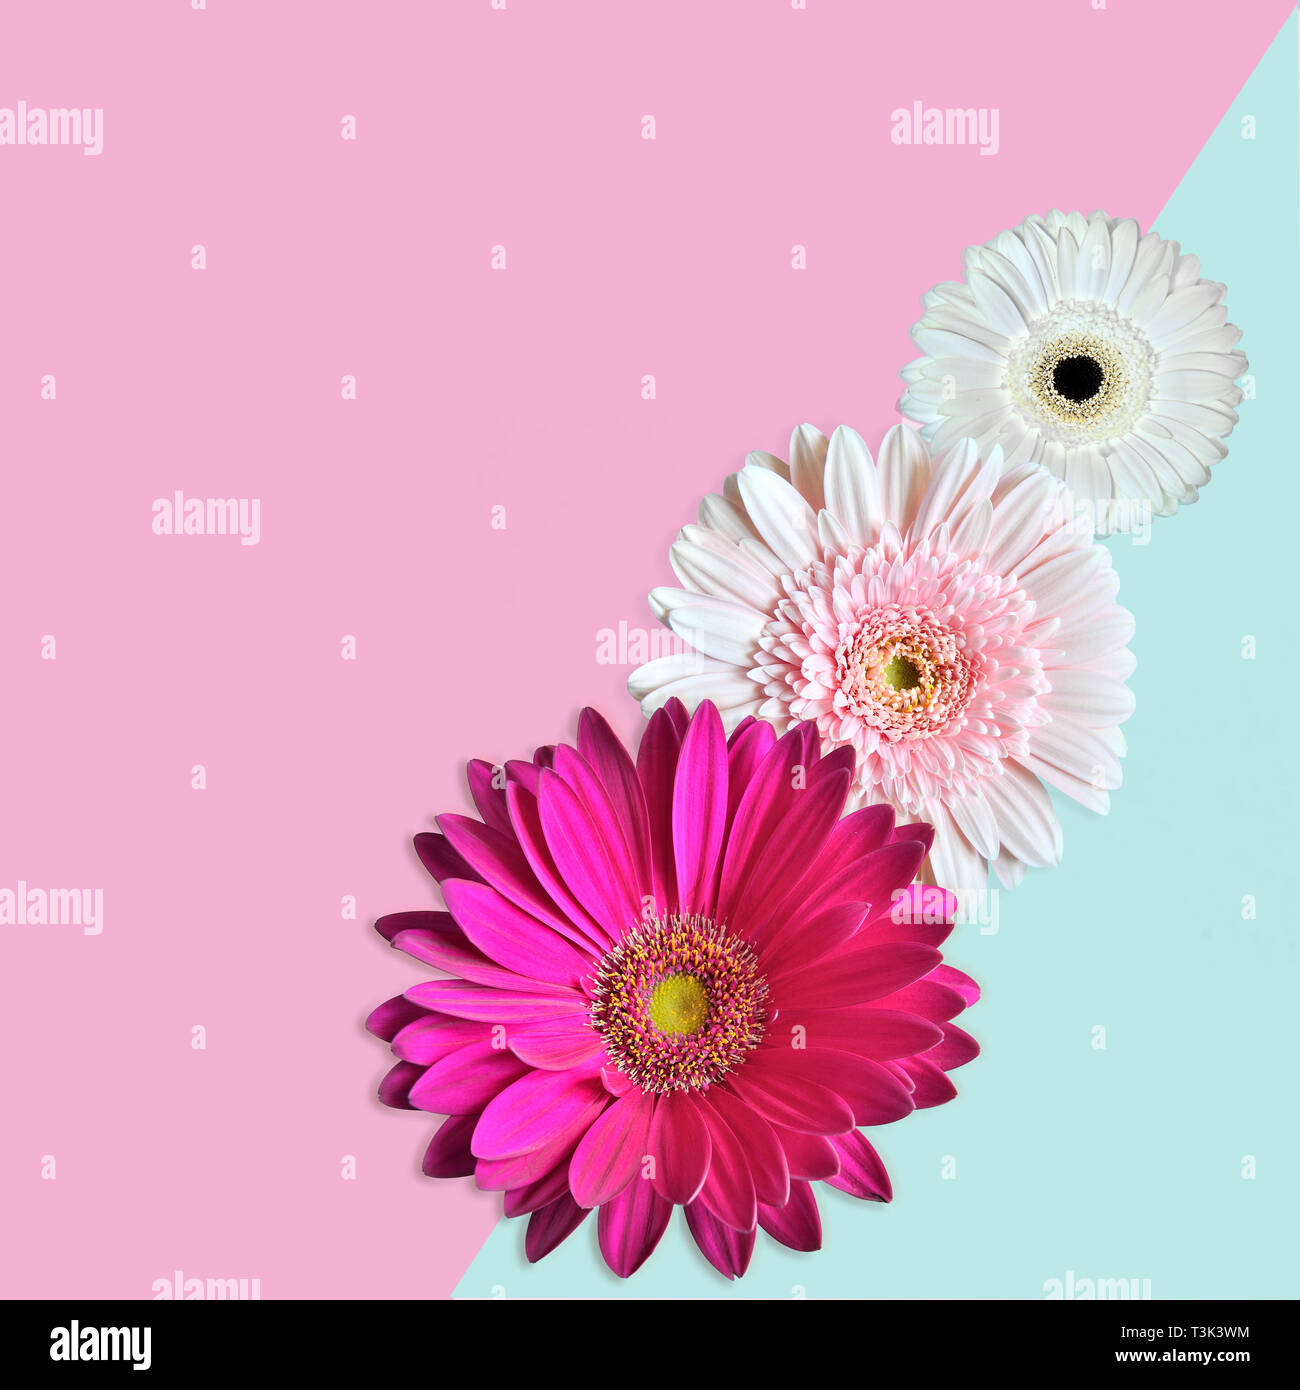 Three pink and white gerbera flowers close up on geometric background colored in pastel blue and pale pink shades. Gentle summer or spring floral back Stock Photo